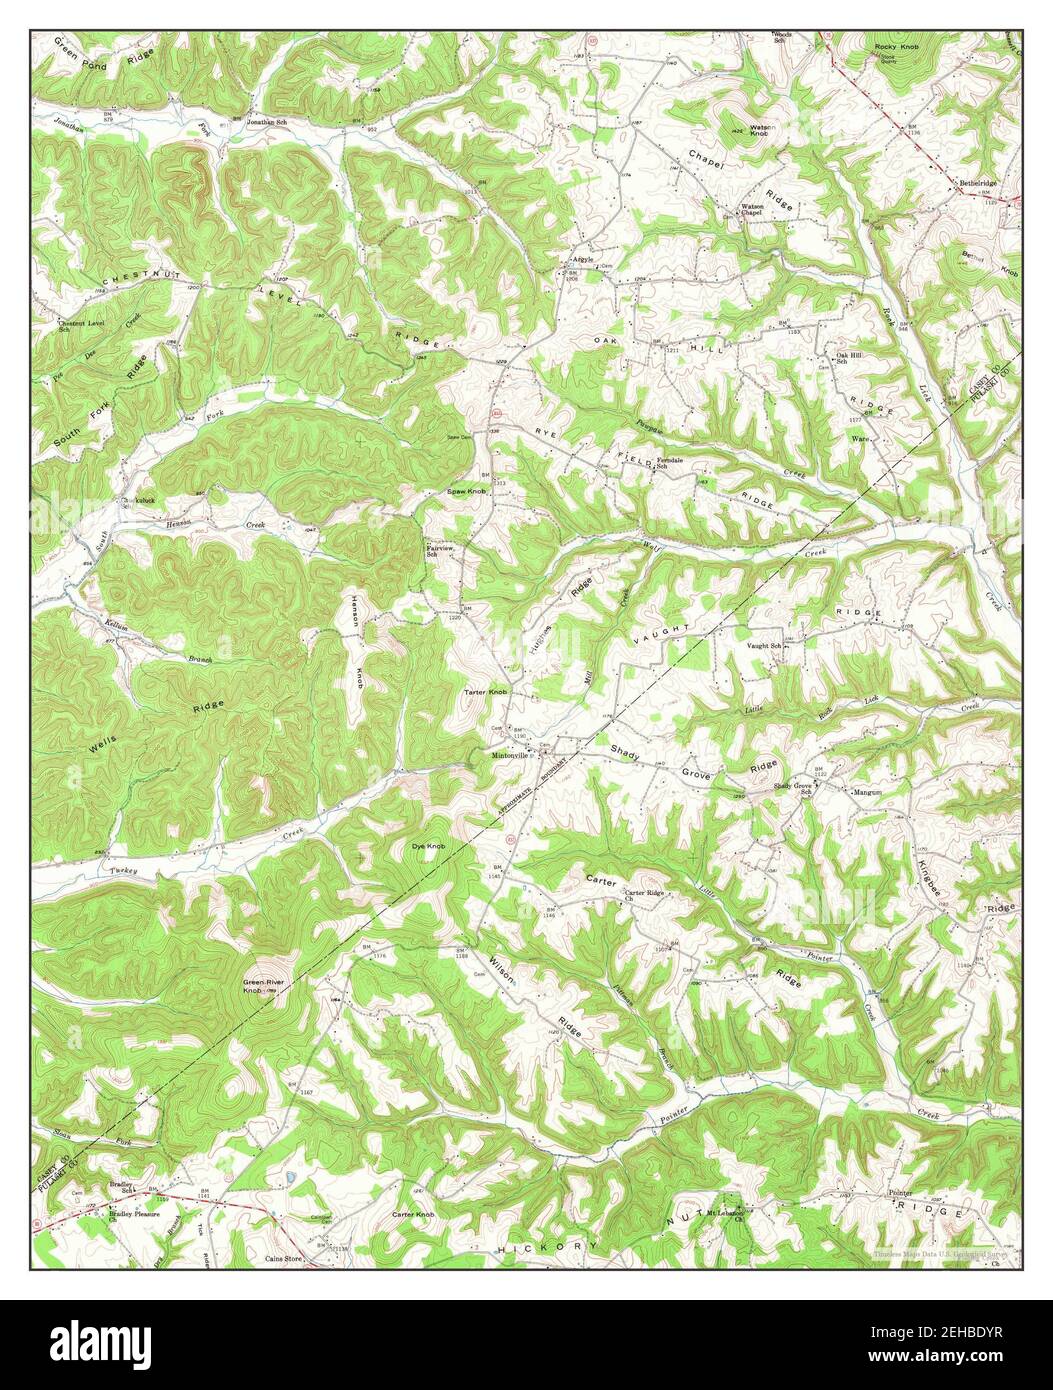 Mintonville, Kentucky, map 1953, 1:24000, United States of America by Timeless Maps, data U.S. Geological Survey Stock Photo